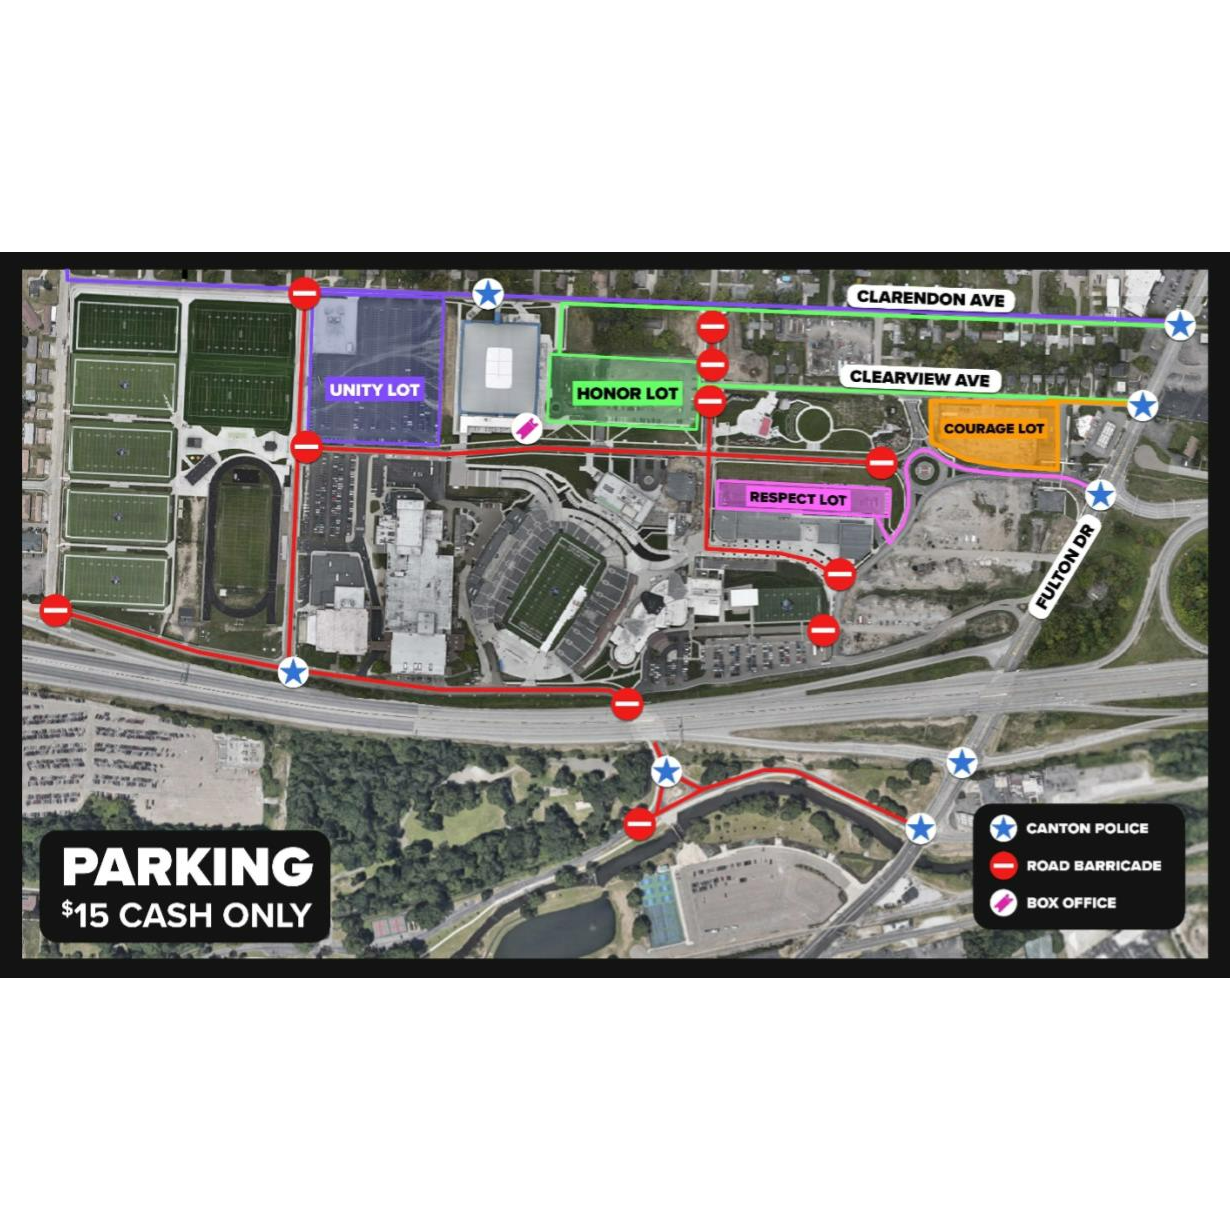 Hall of Fame Village Announces Parking Plan for Large Ticketed Events